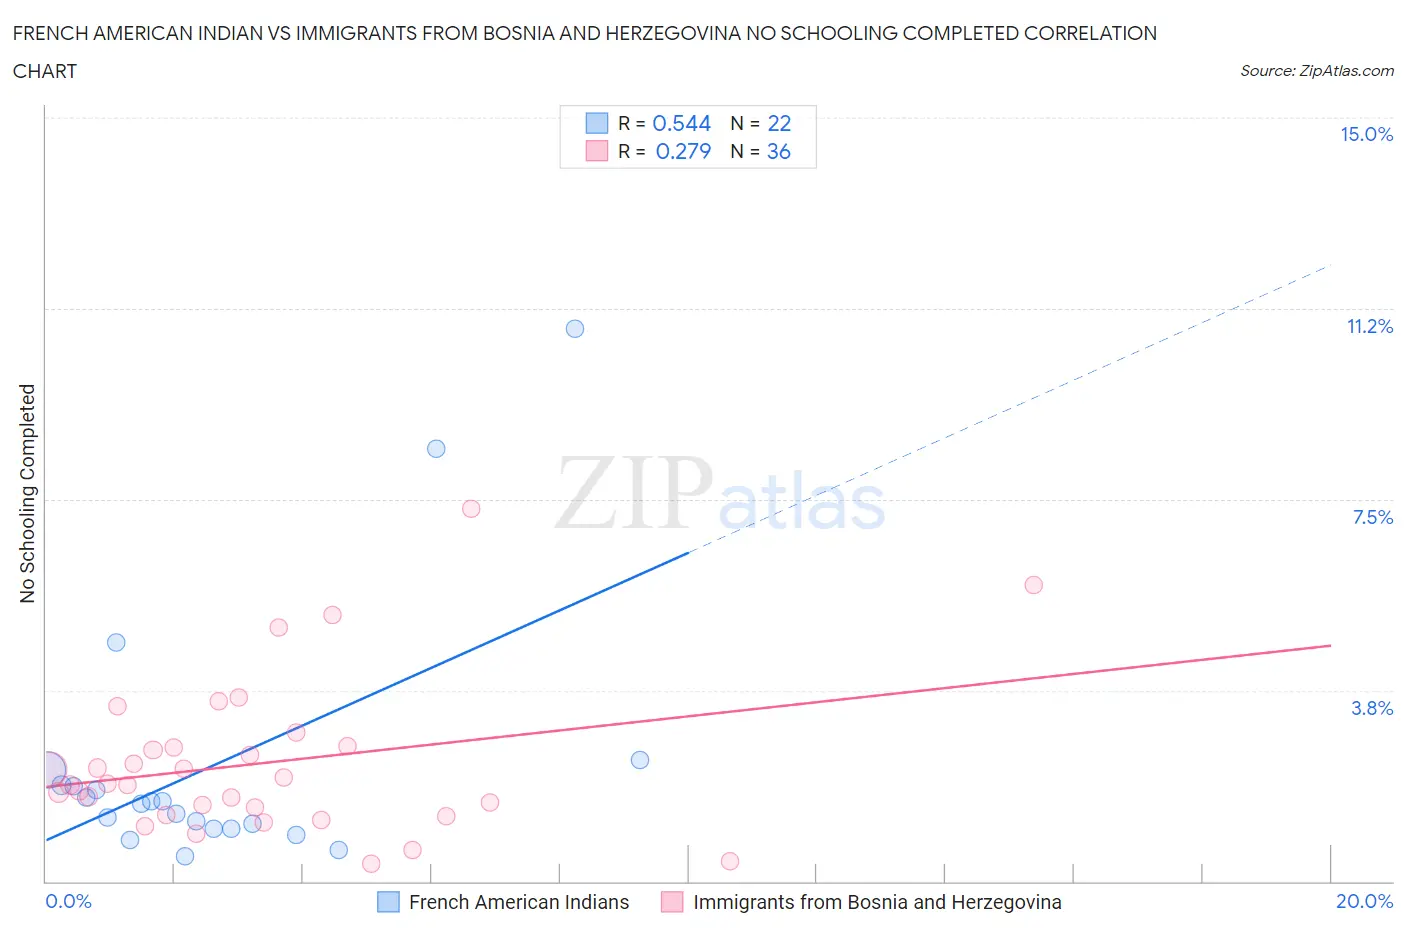 French American Indian vs Immigrants from Bosnia and Herzegovina No Schooling Completed